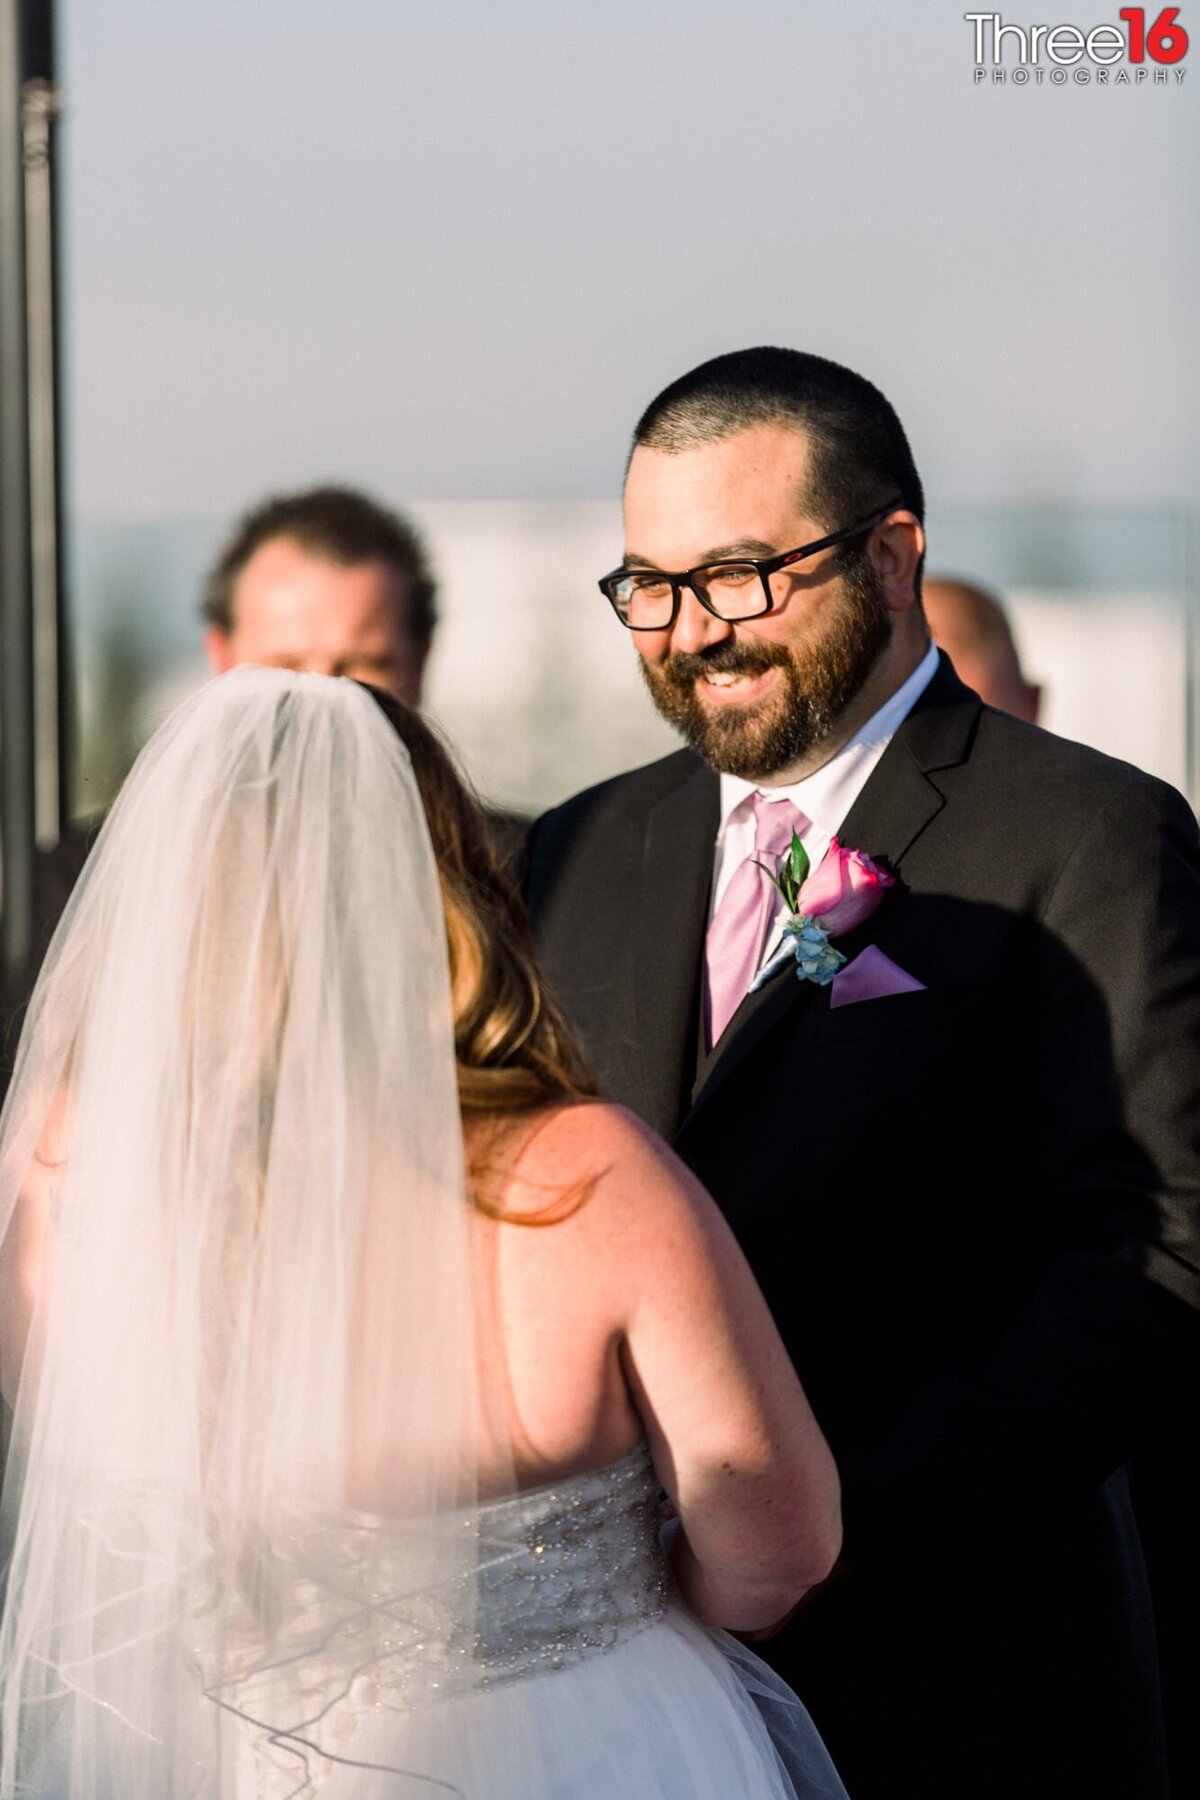 Groom gives his Bride a big smile as she reads her vows to him during the ceremony